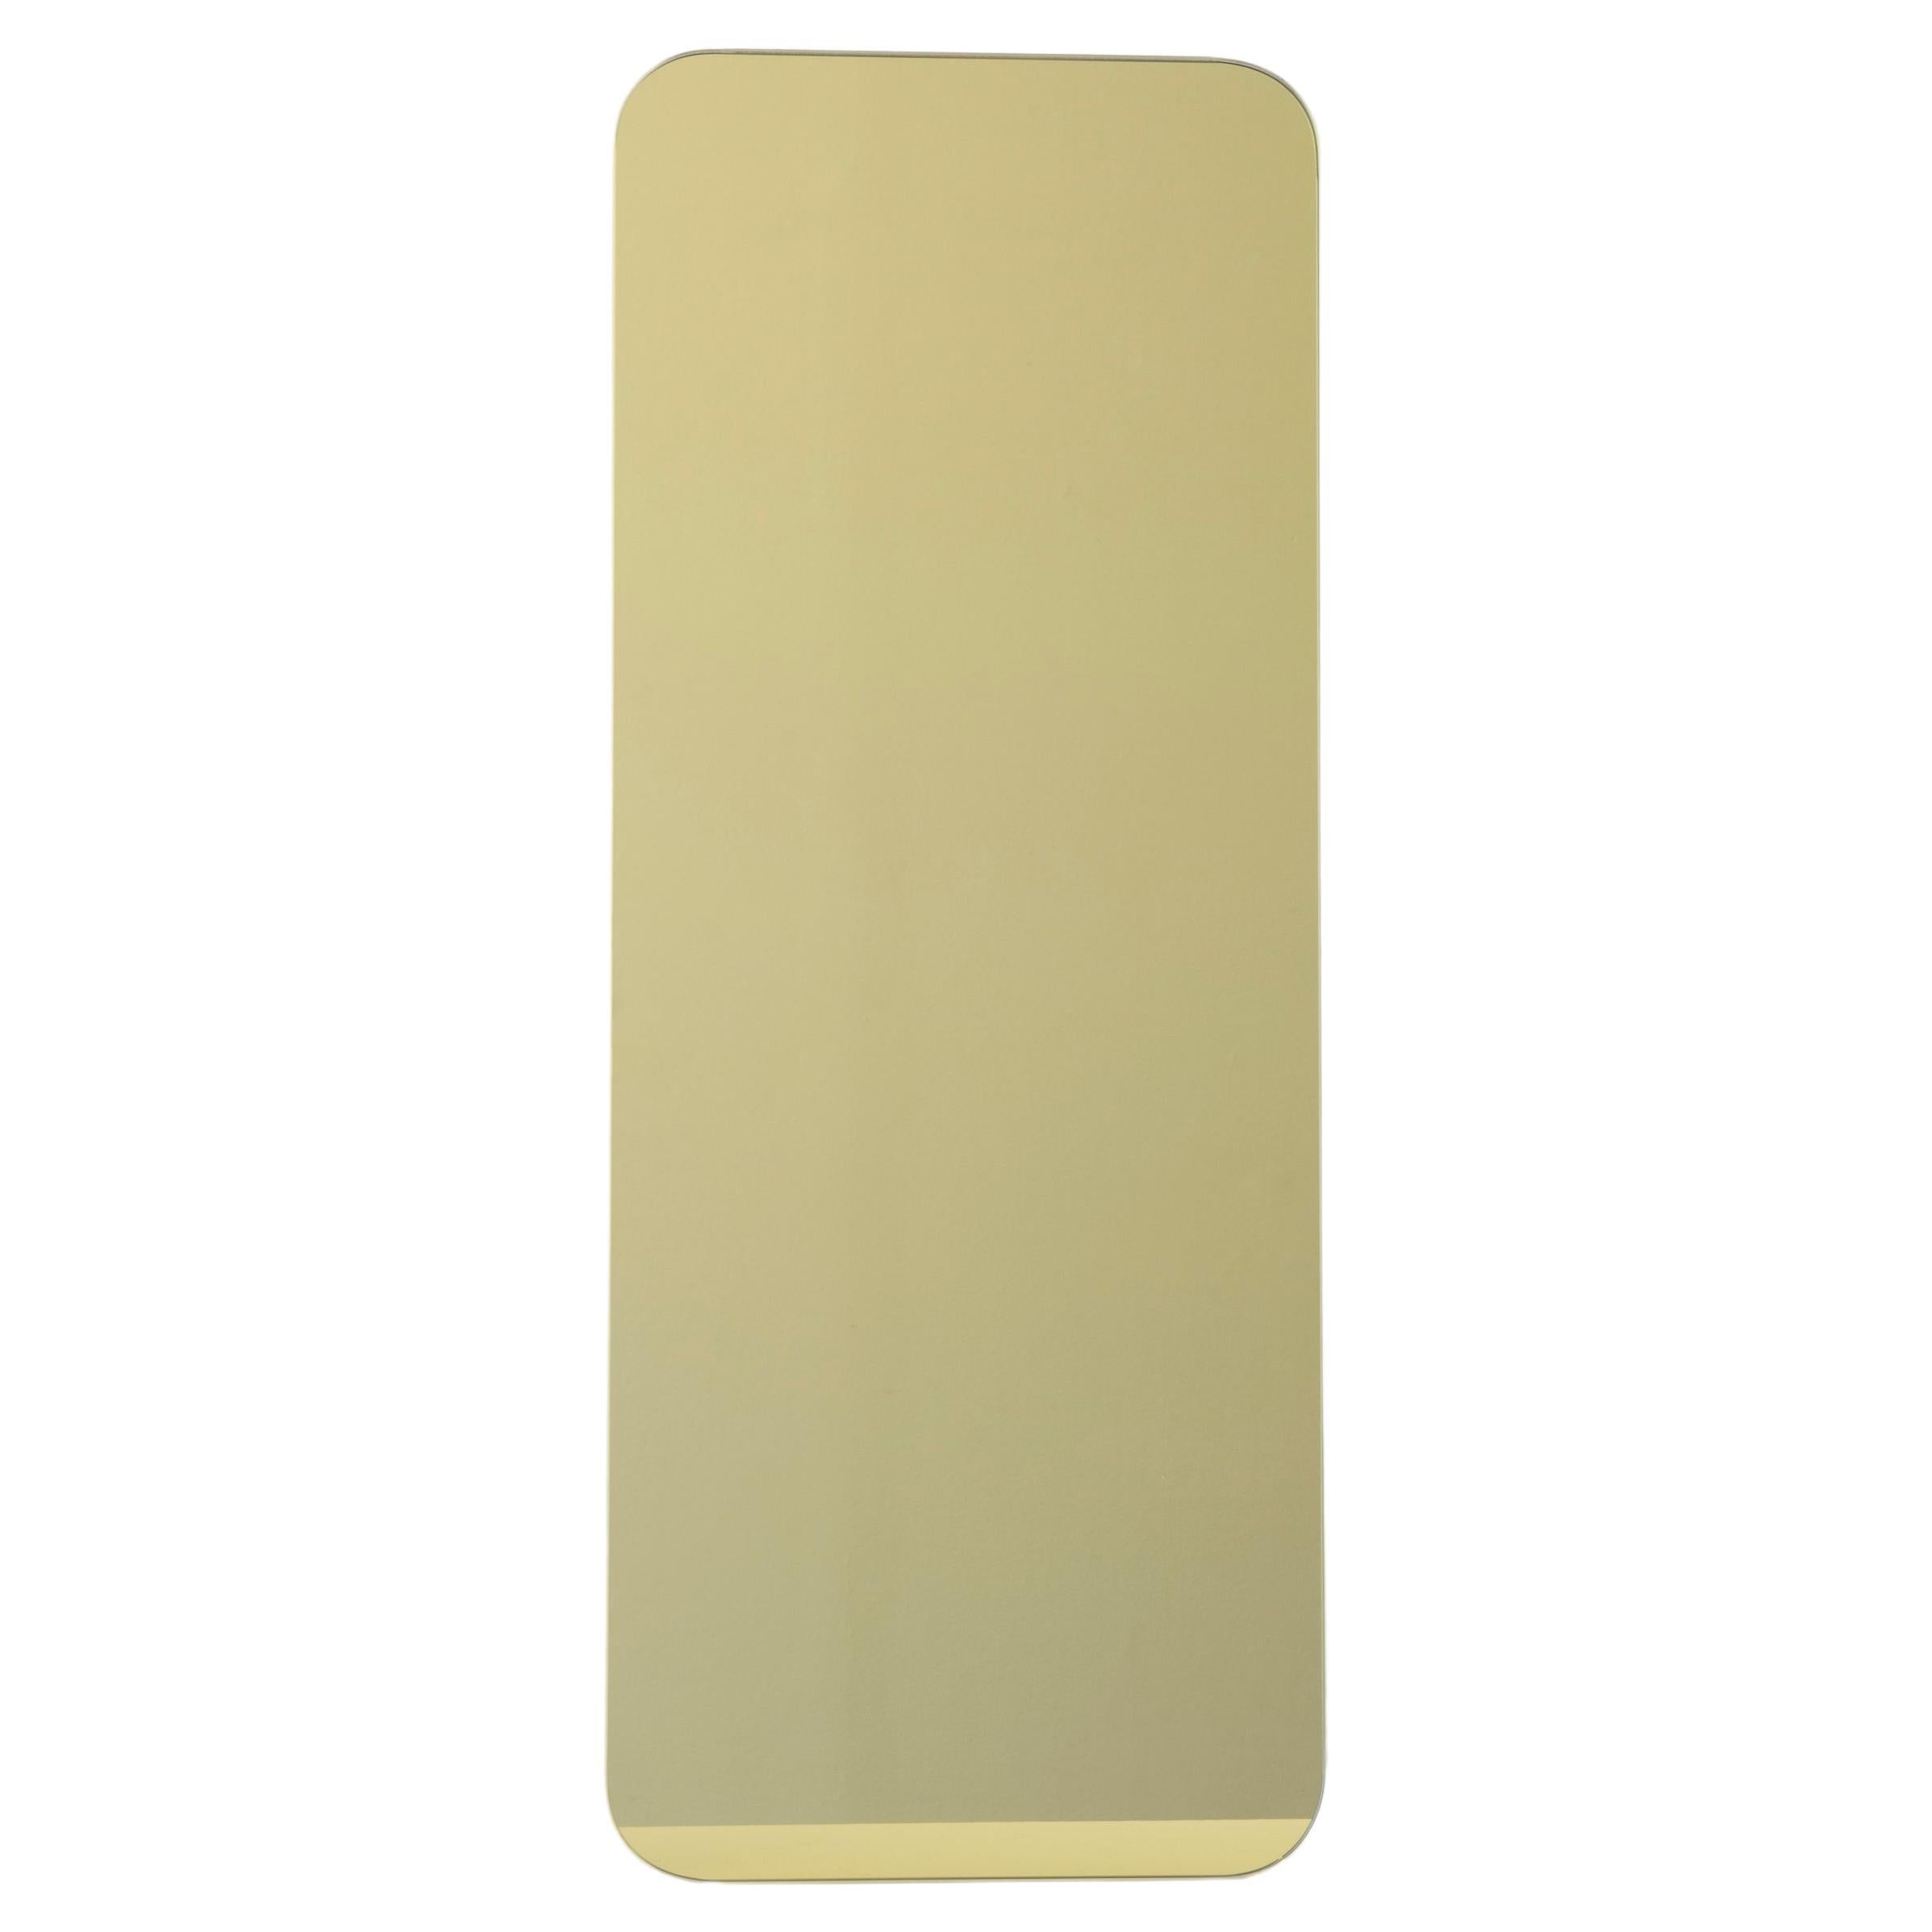 Quadris Gold Rectangular Frameless Contemporary Mirror with Floating Effect, XL For Sale